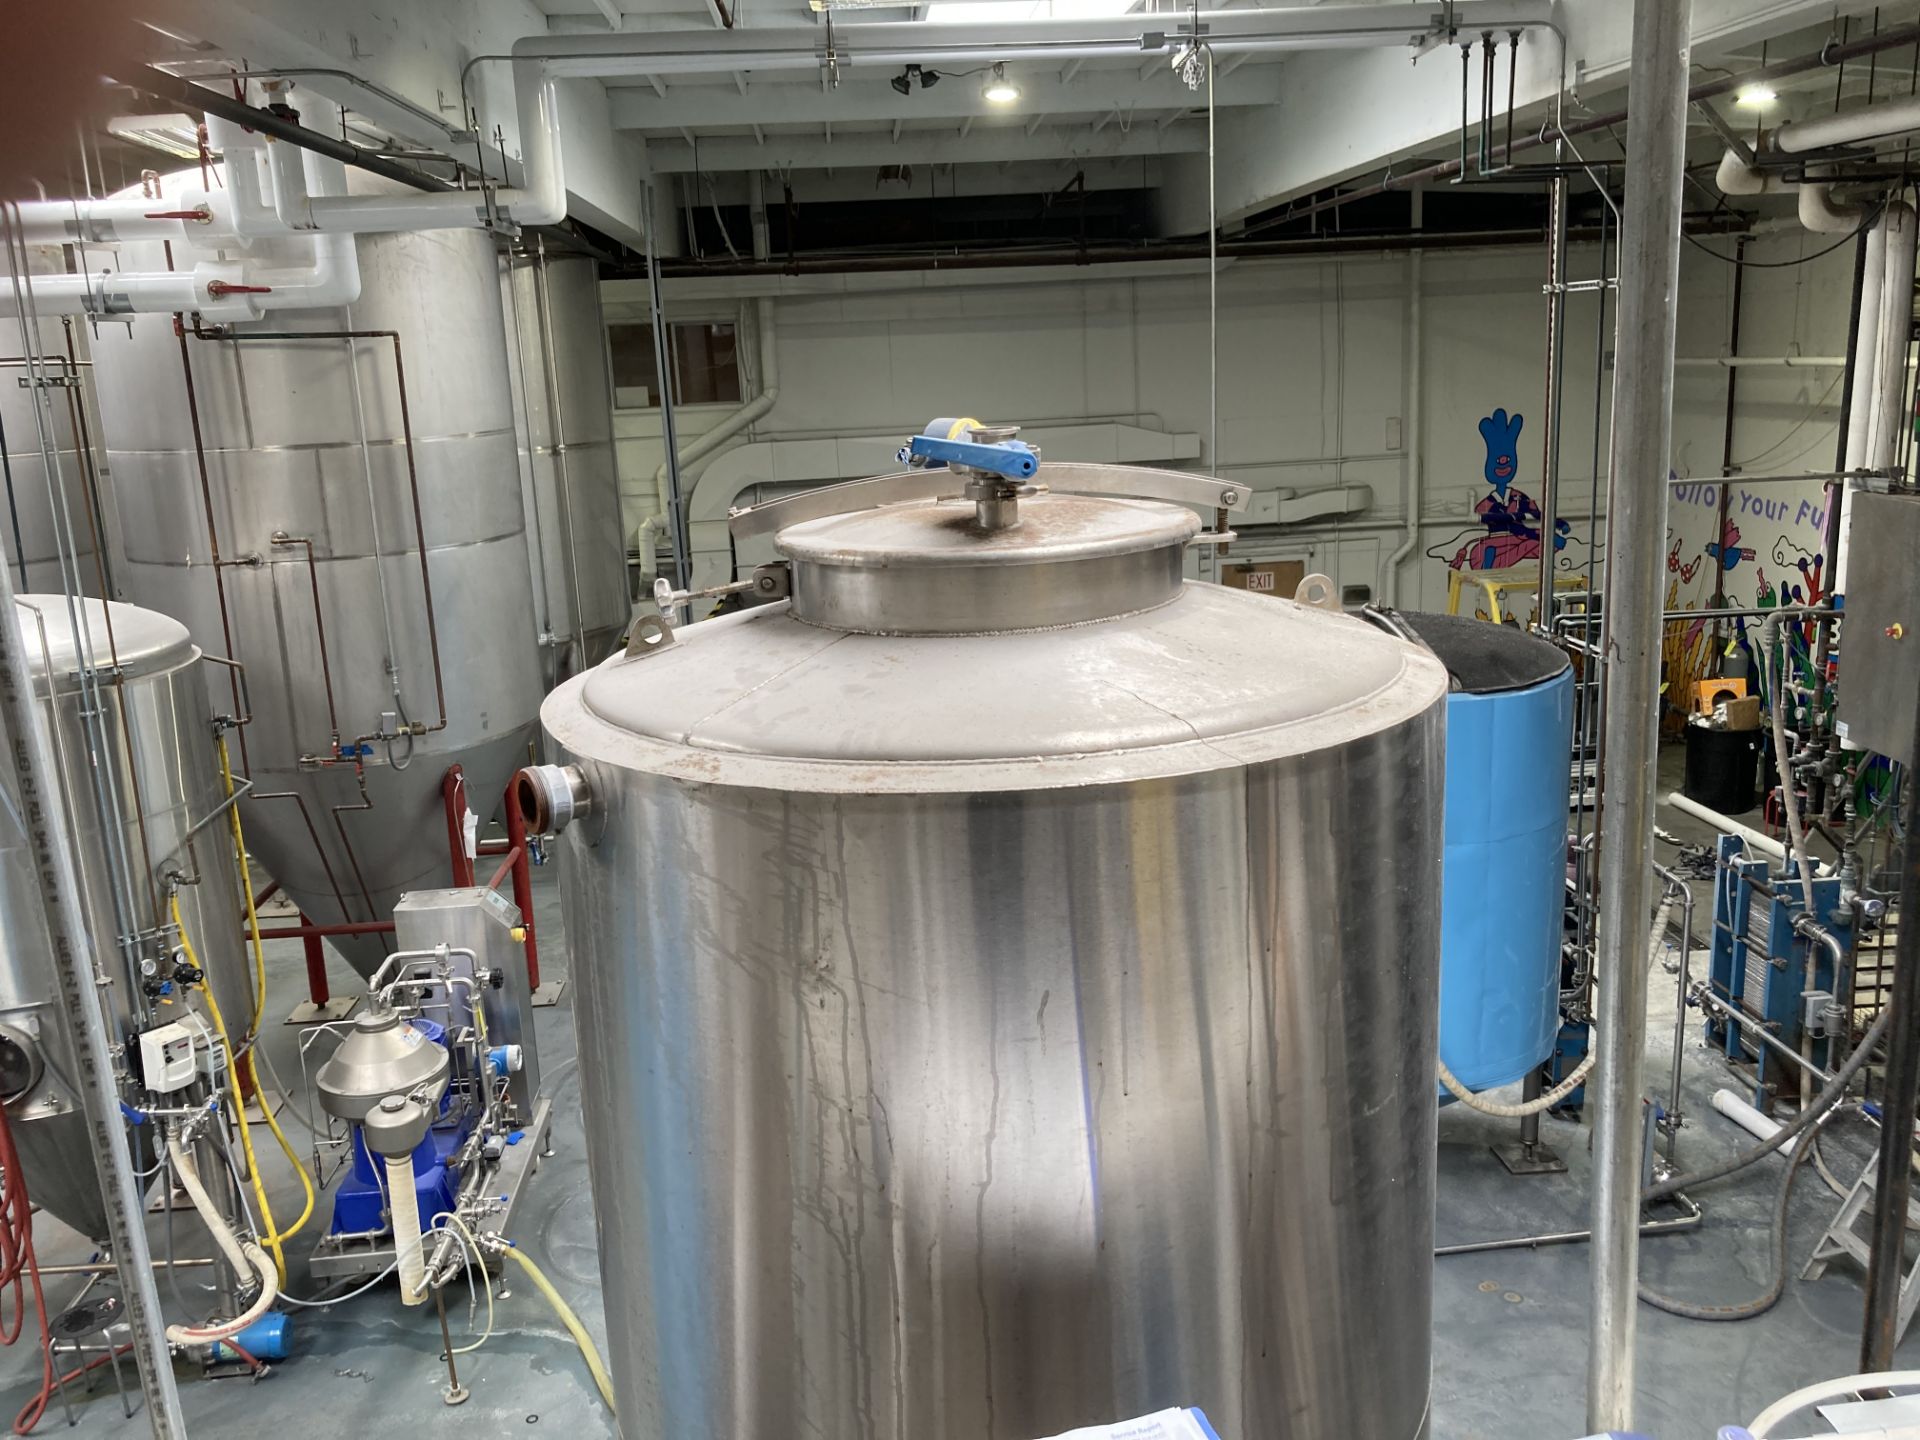 Hot liquor 60 bbl. stainless steel steam jacketed insulated tank with manway on top, 14 ft OAH x - Image 2 of 2